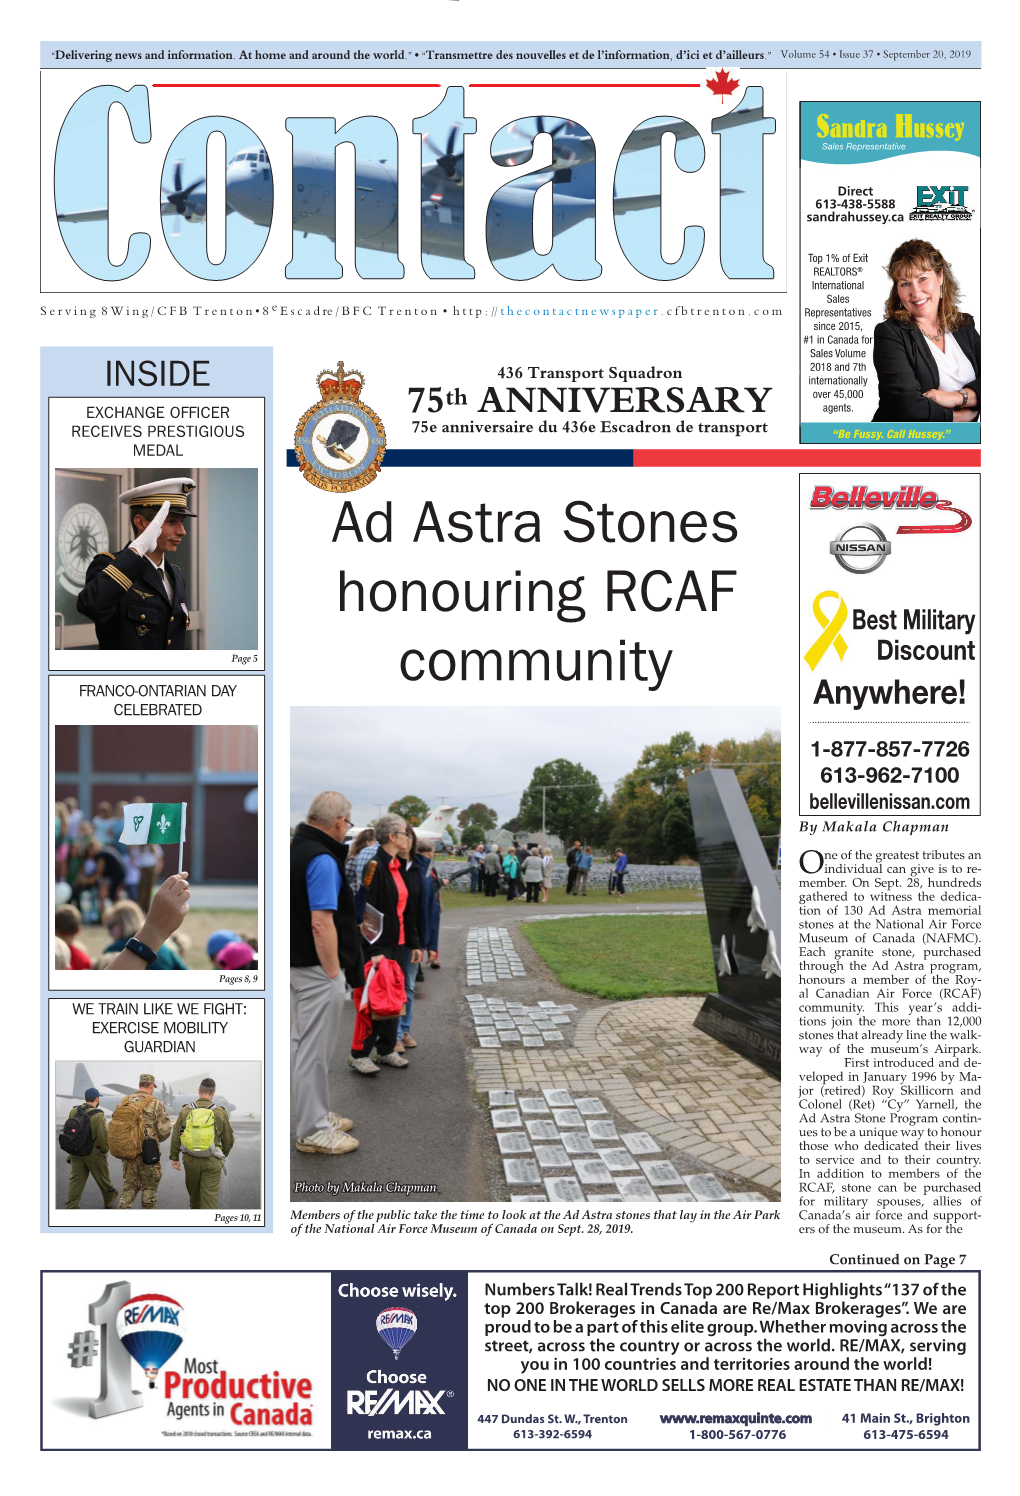 Ad Astra Stones Honouring RCAF Community